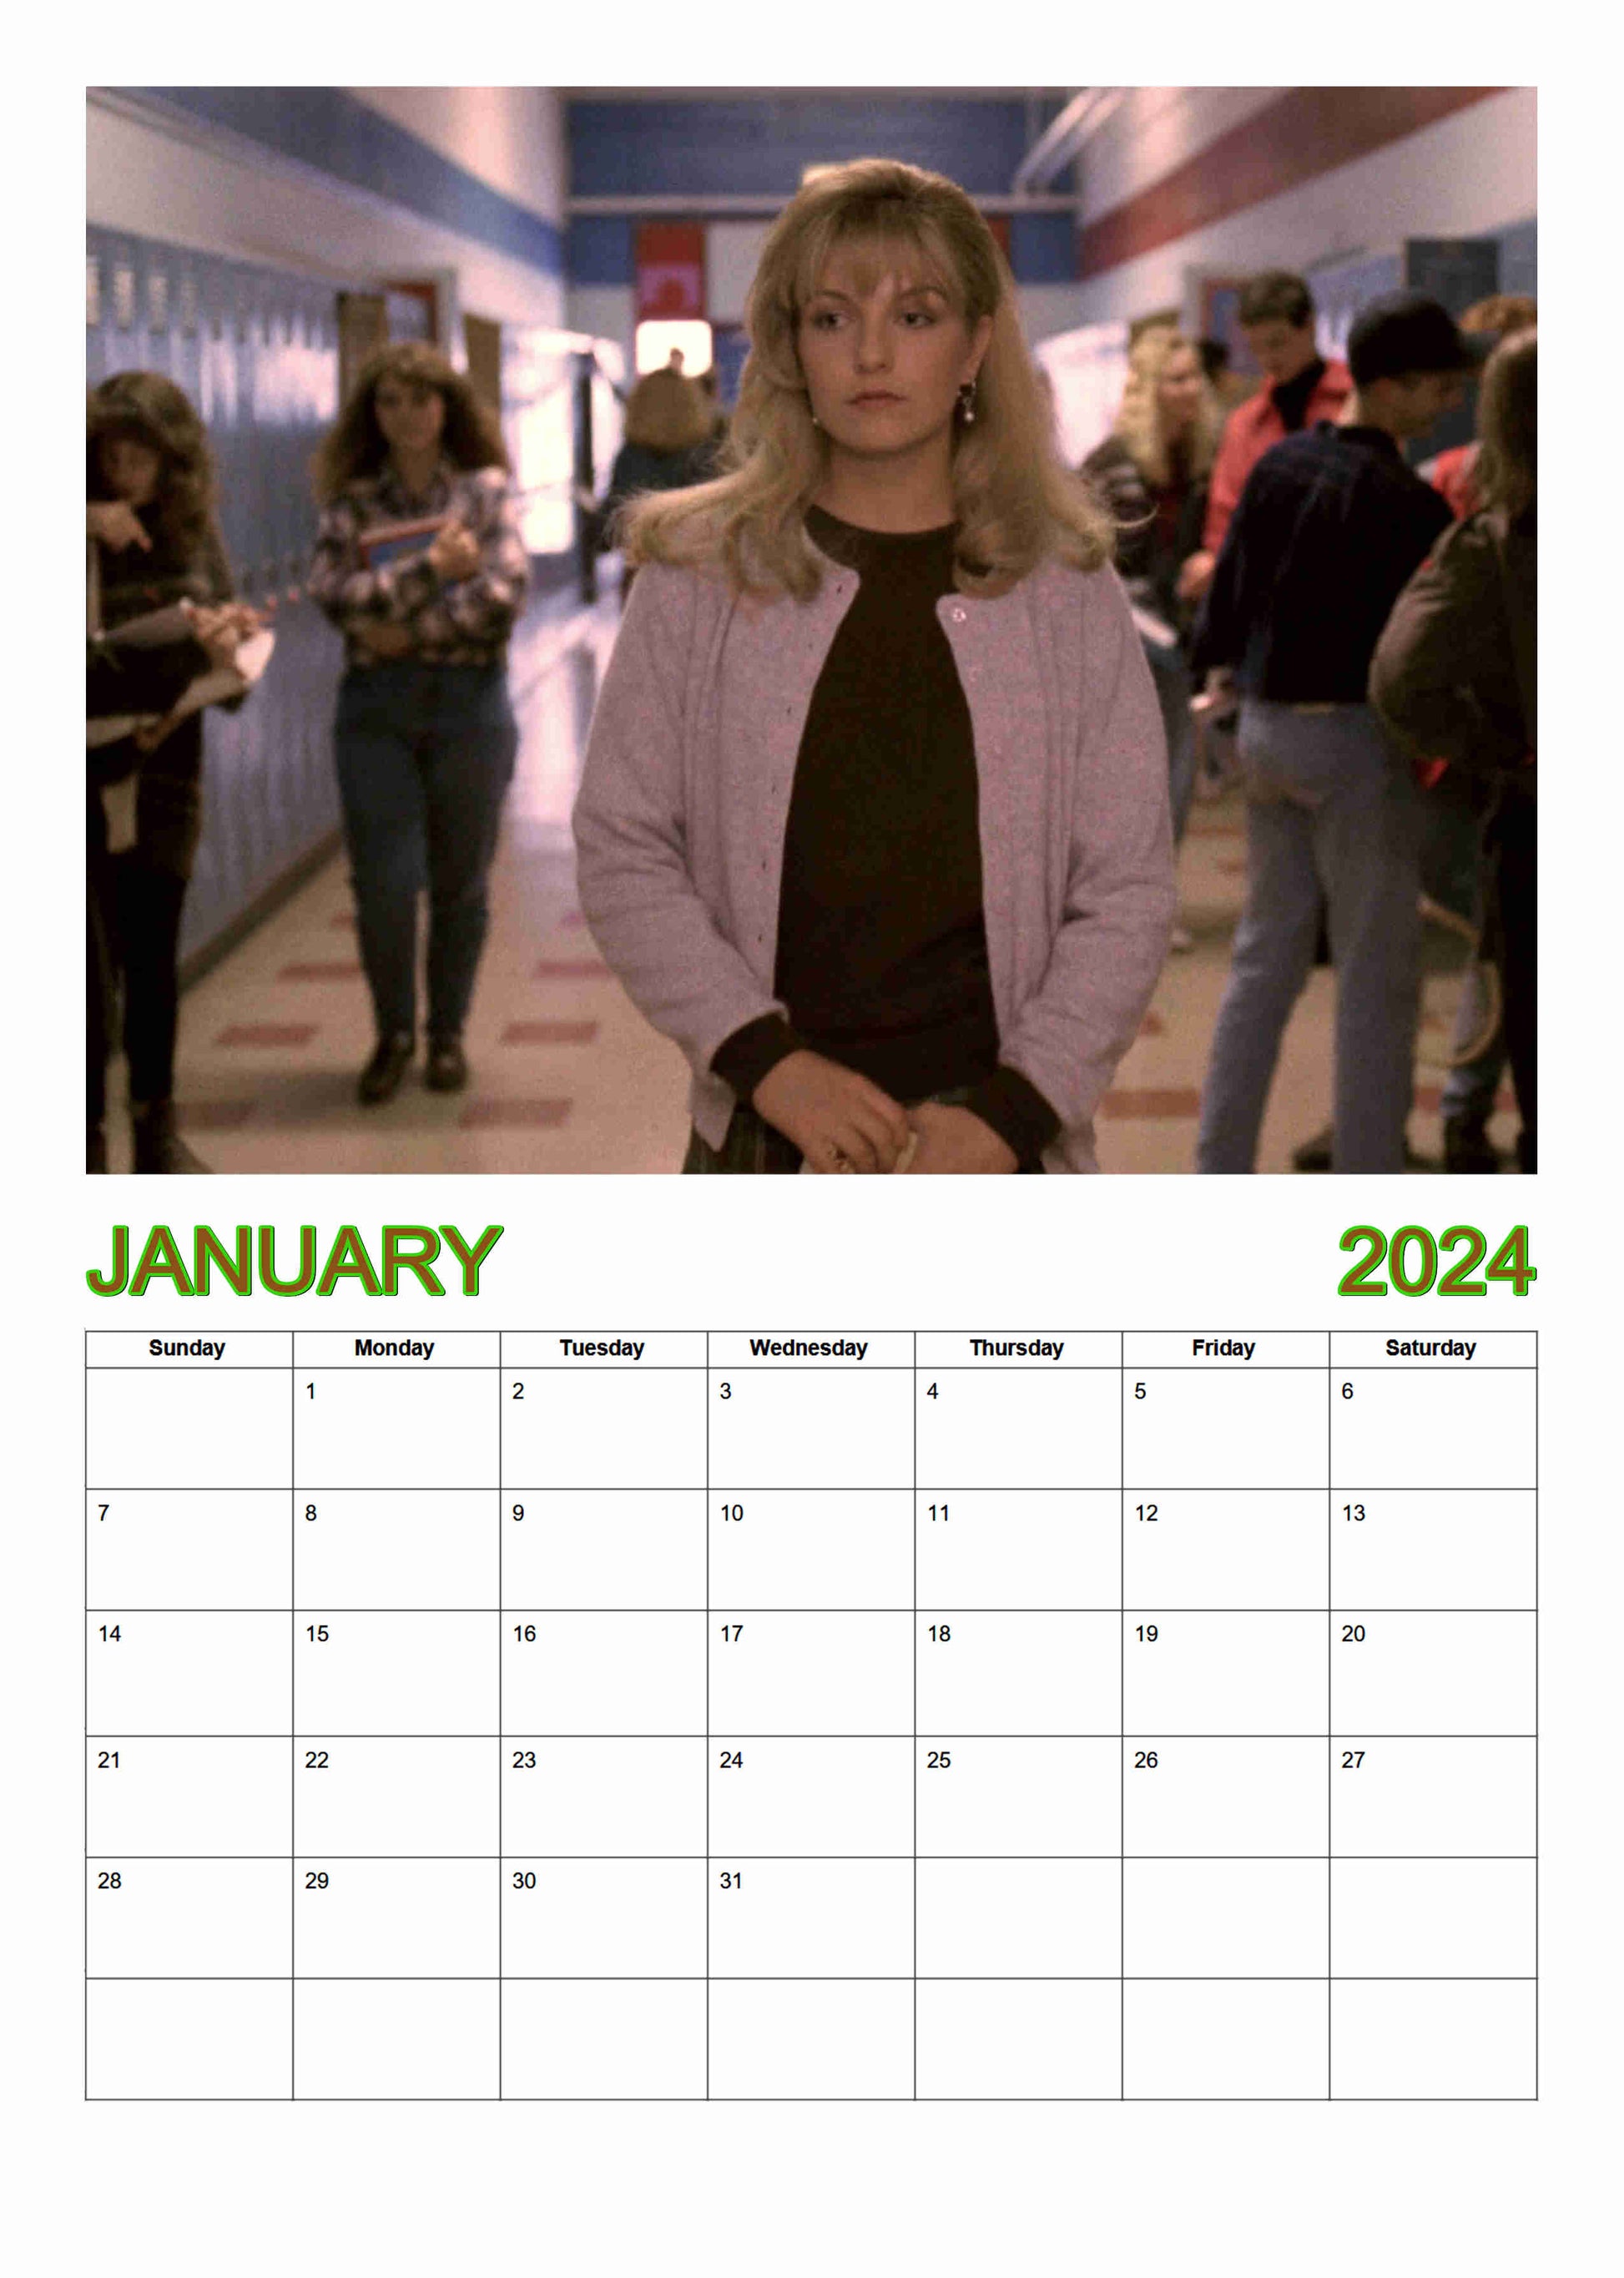 Preview of the month of January featuring Laura Palmer